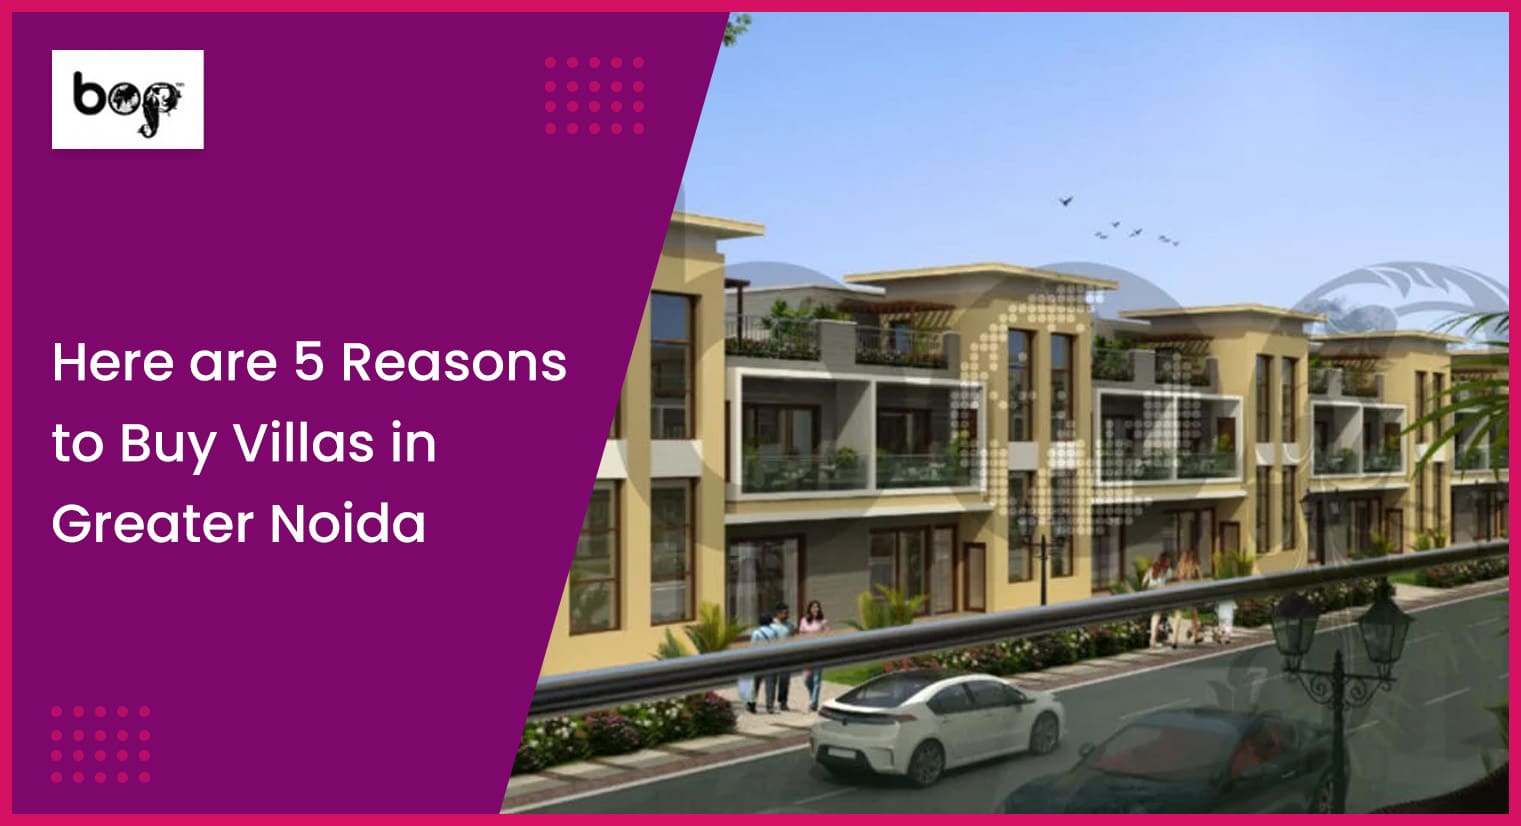 Here are 5 Reasons to Buy Apartments in Greater Noida